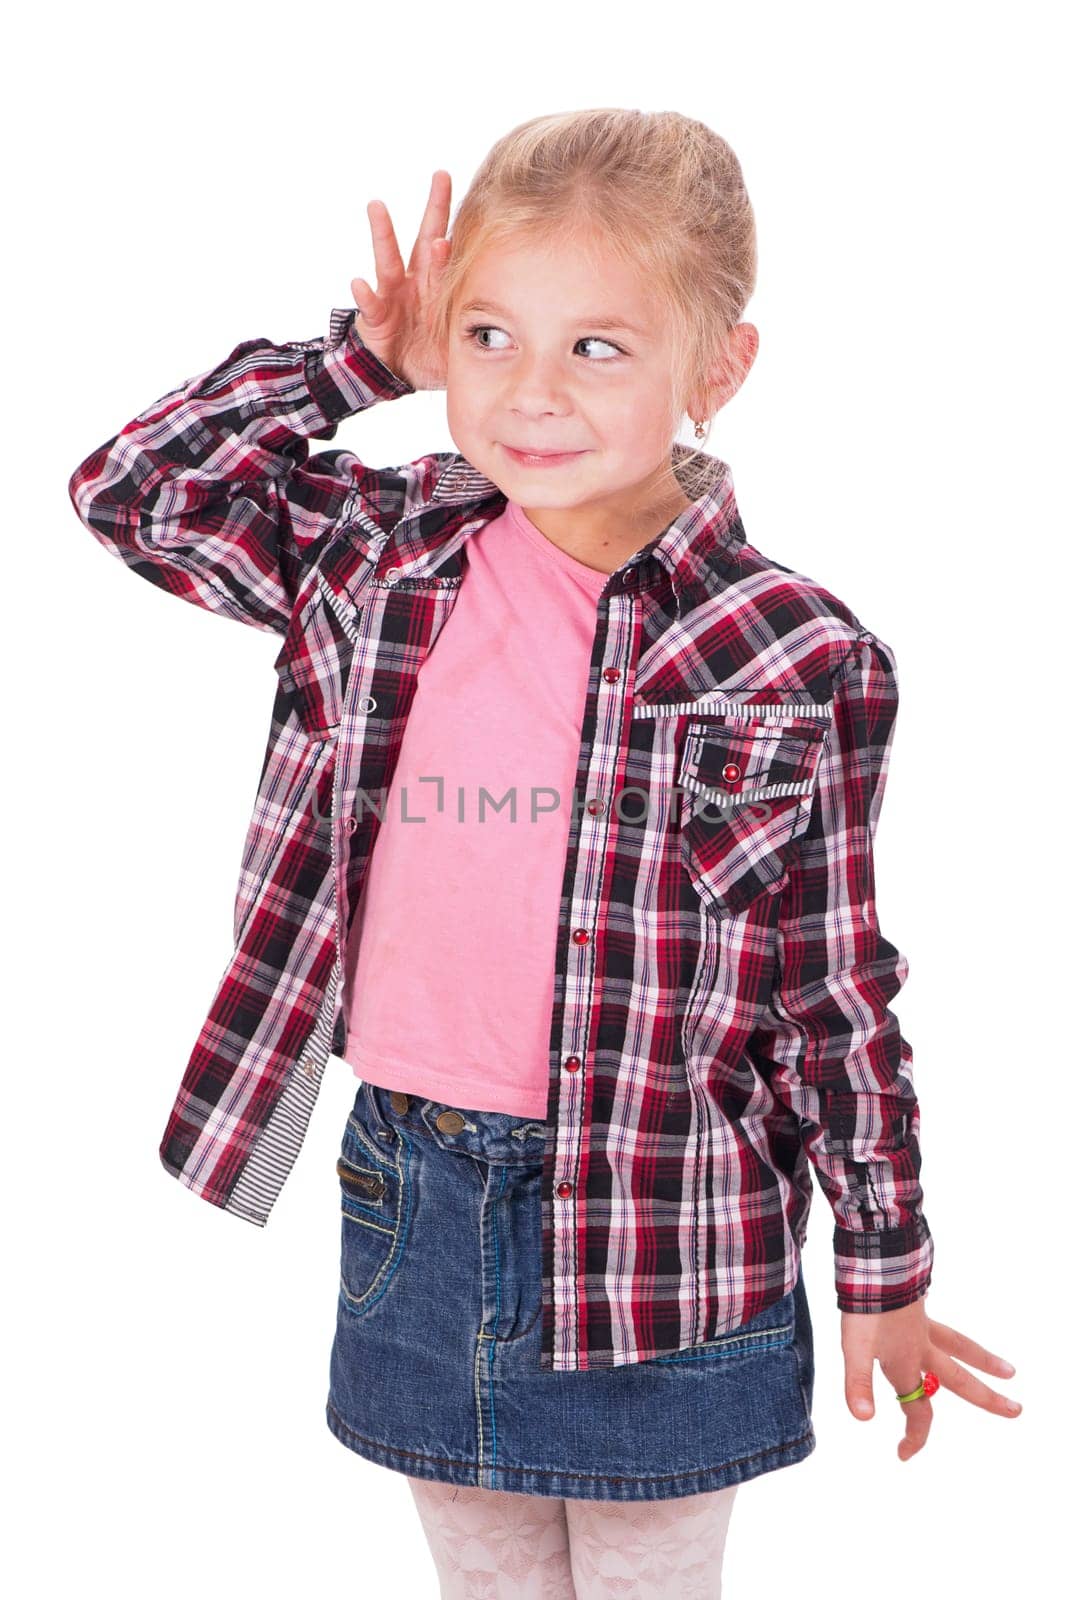 Studio shot portrait of thoughtful little girl who is eavesdropping. Copy space on white background. by aprilphoto